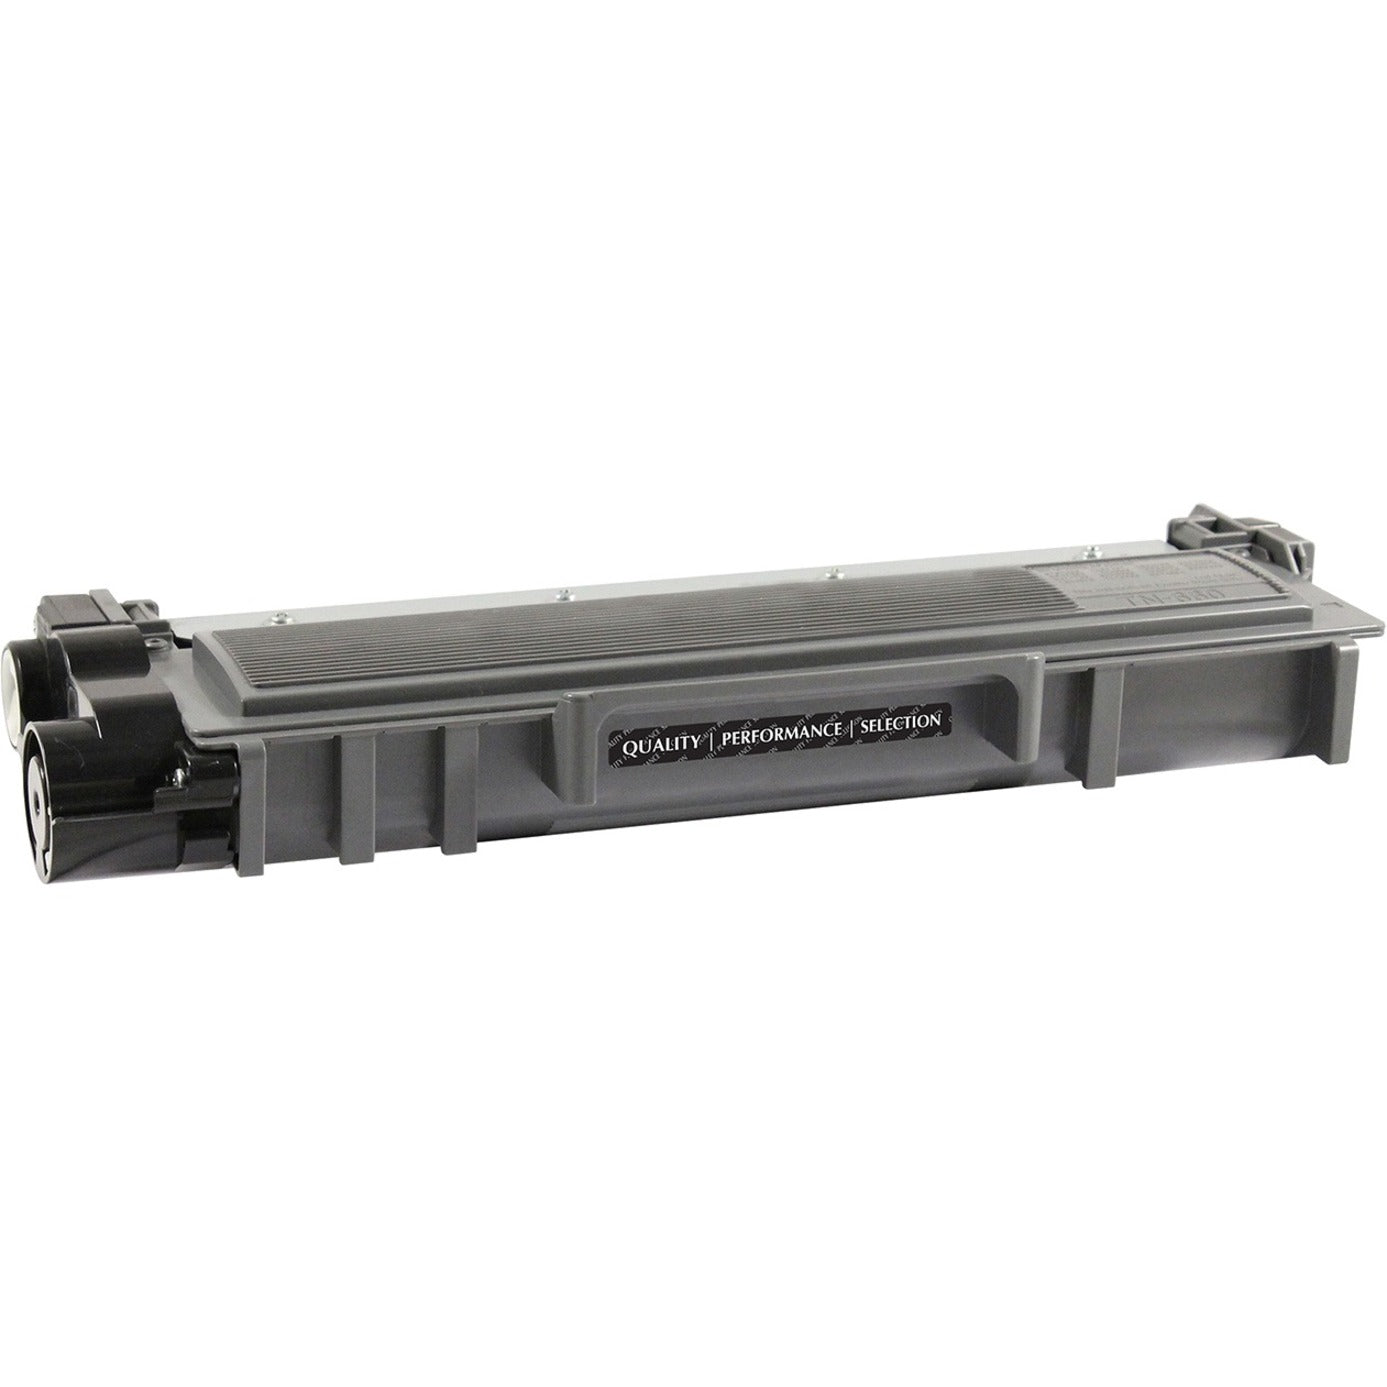 V7 V7TN660 Remanufactured High Yield Toner Cartridge for Brother TN660 - 2600 page yield, Black